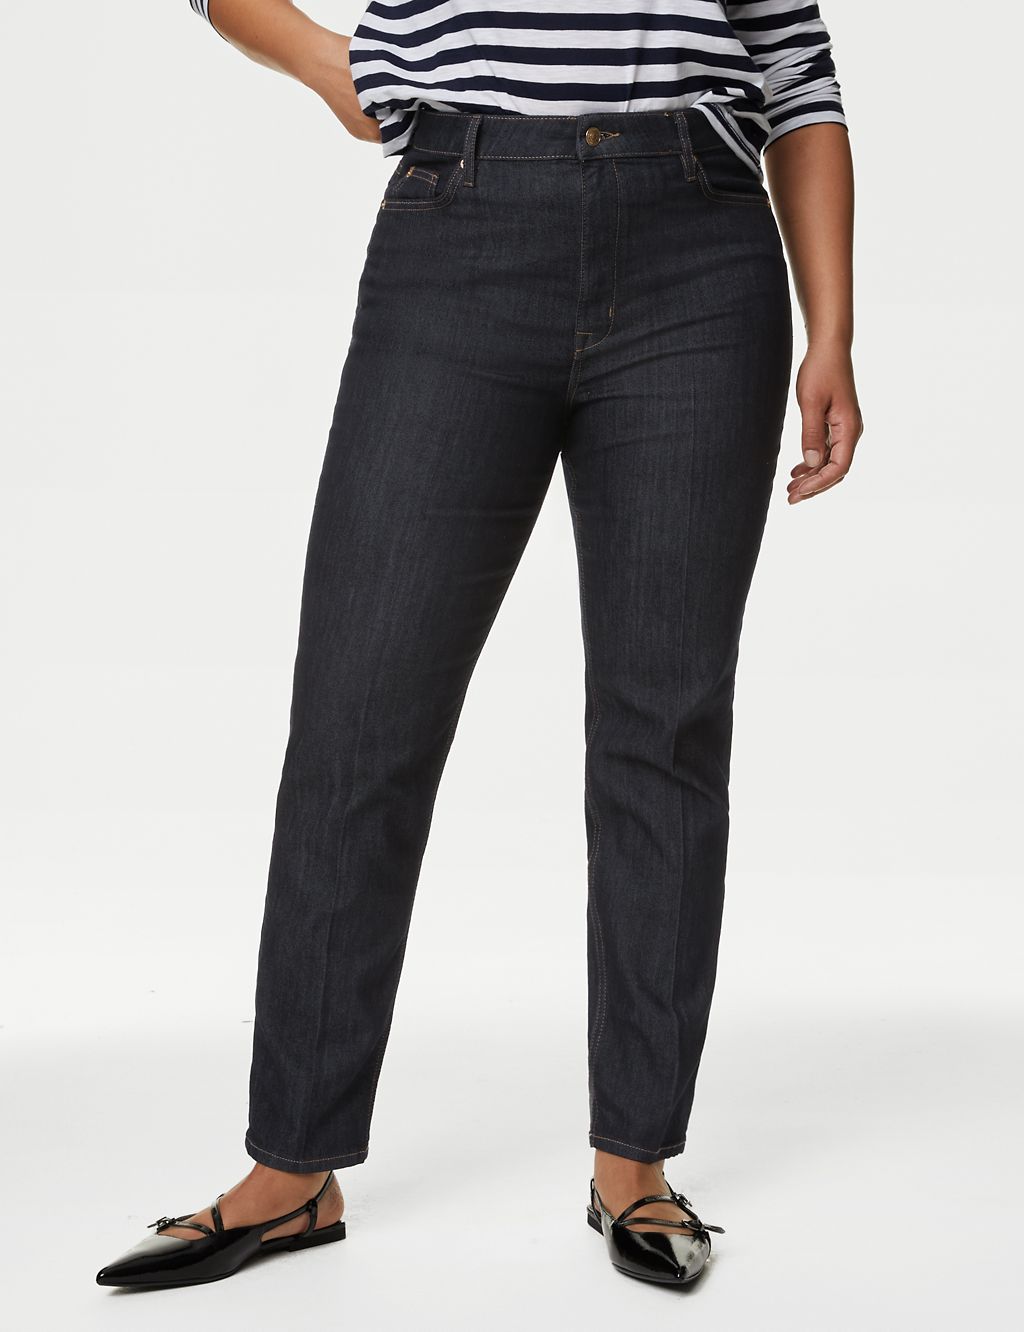 Sienna High Waisted Smart Jeans 7 of 8